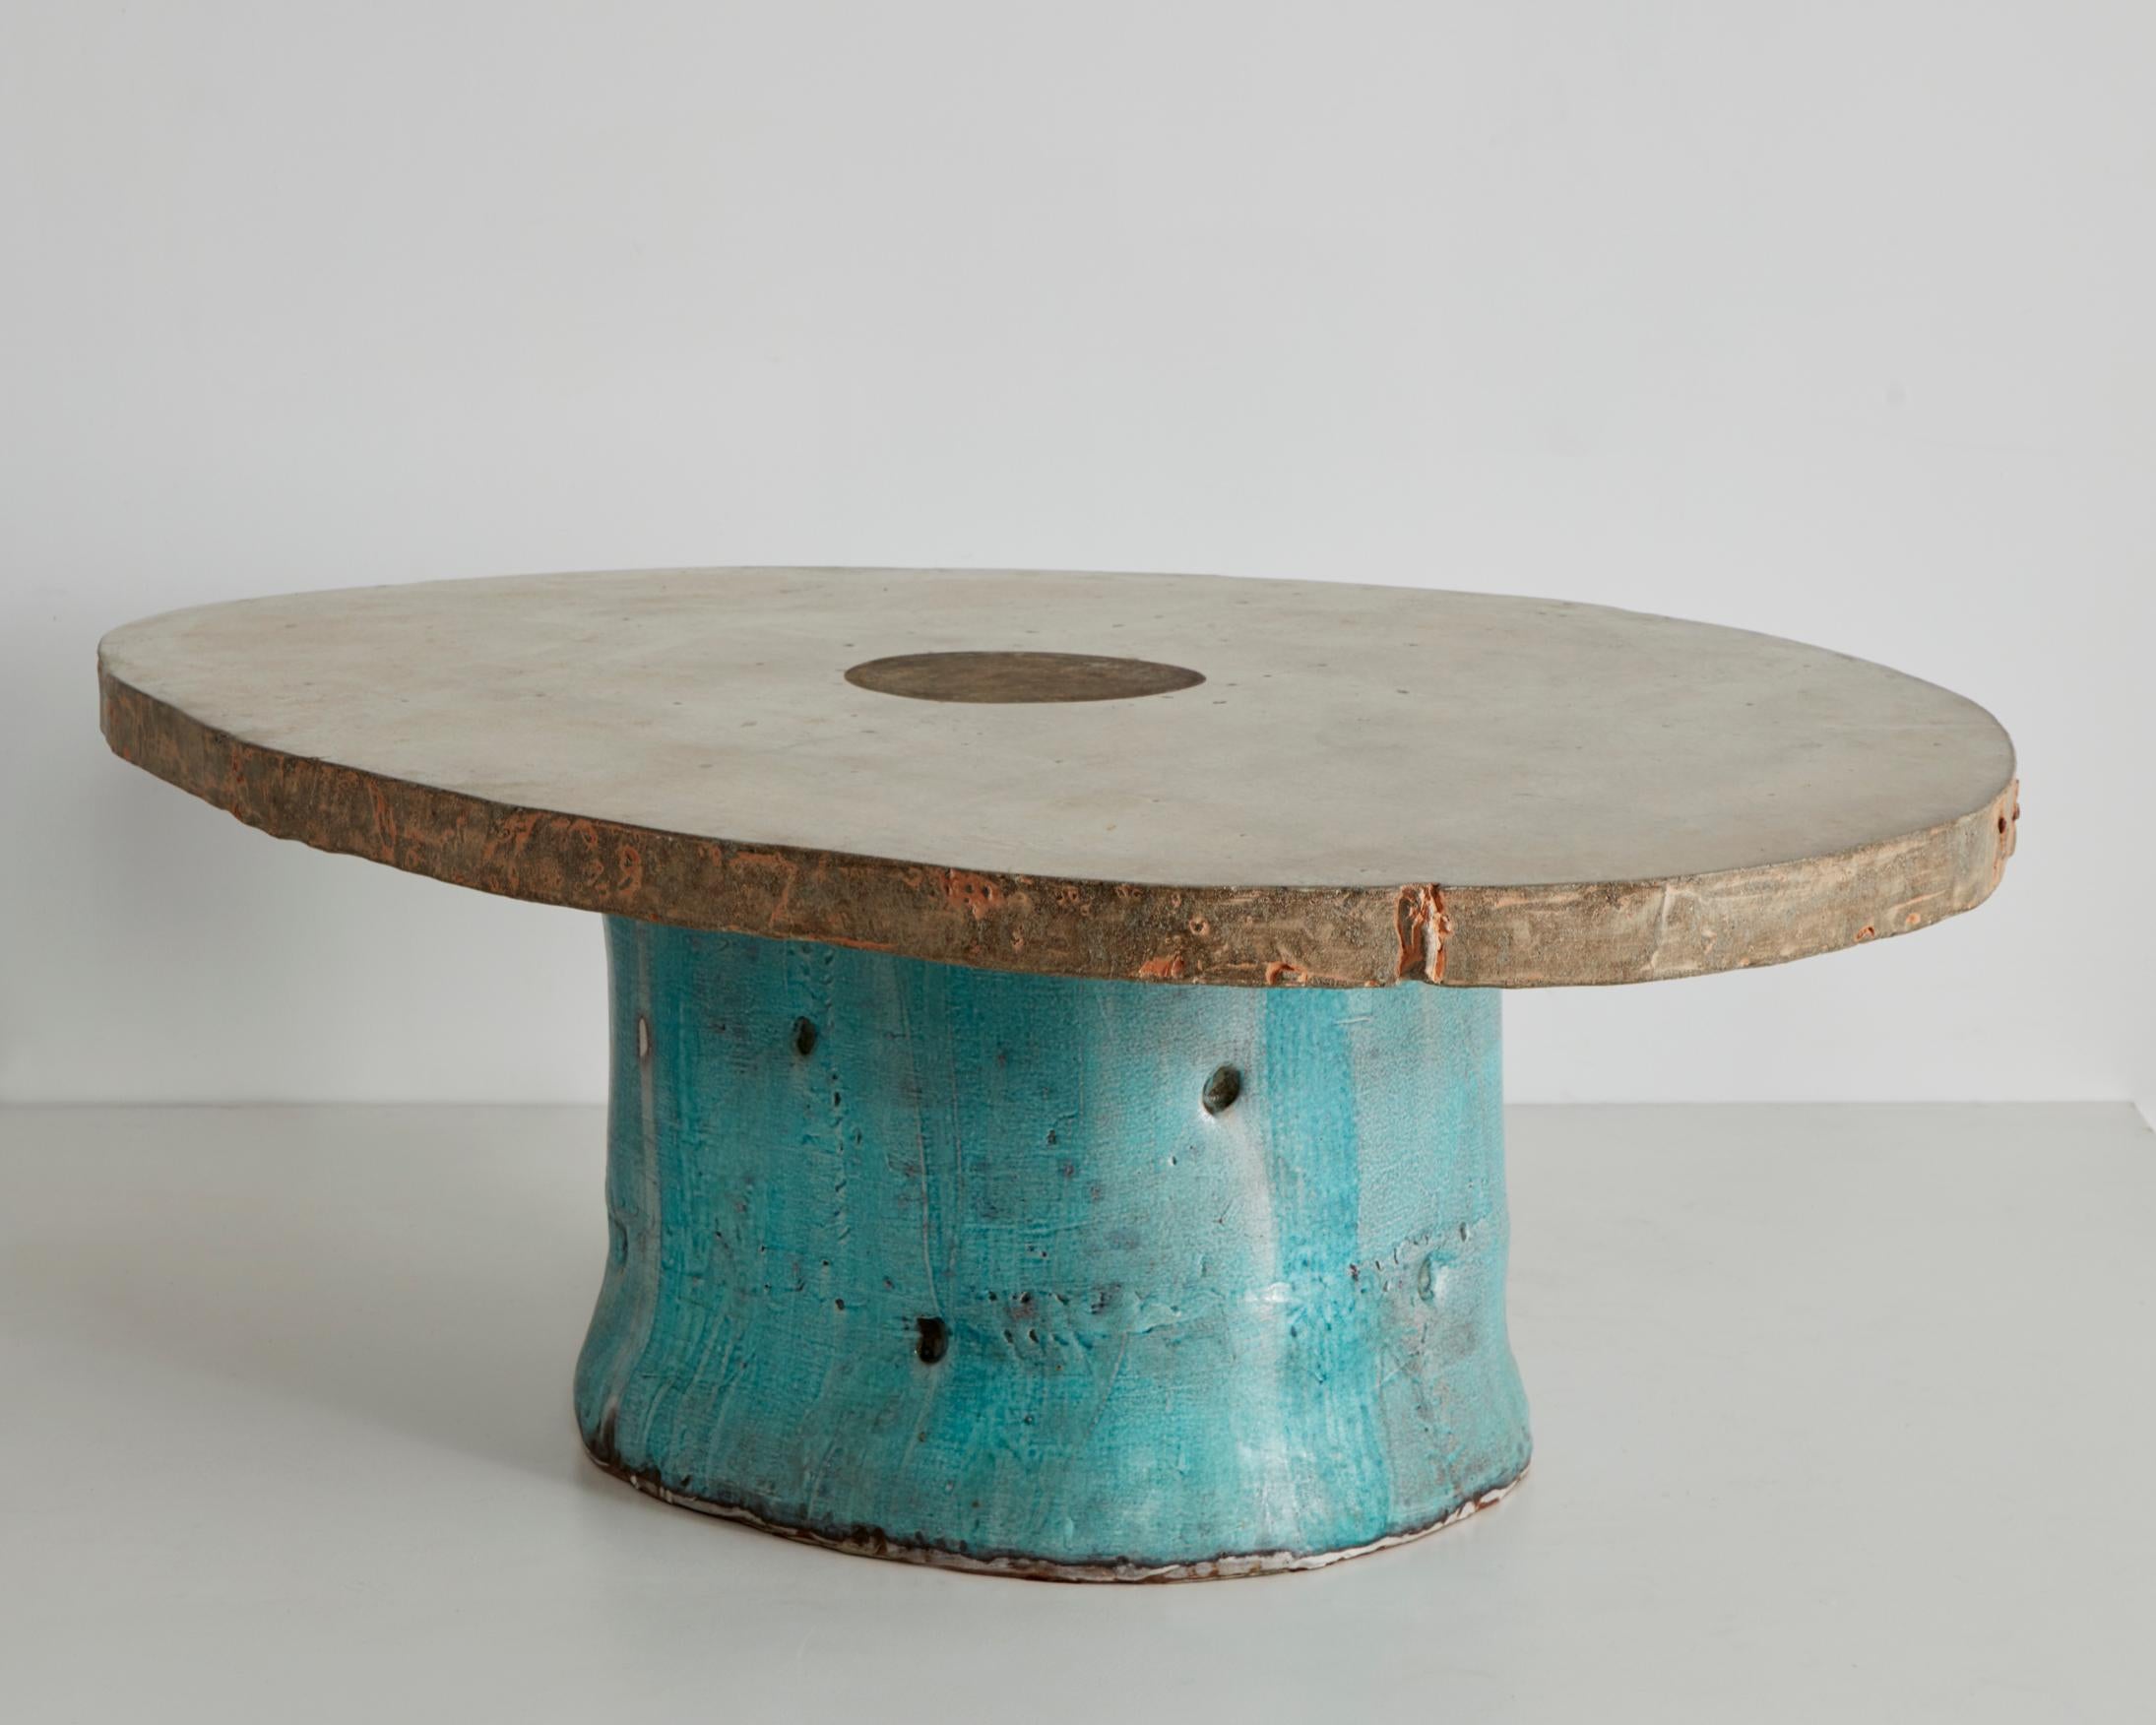 Low table in ceramic with concrete top. Designed and made by Hun-Chung Lee, Korea.
 